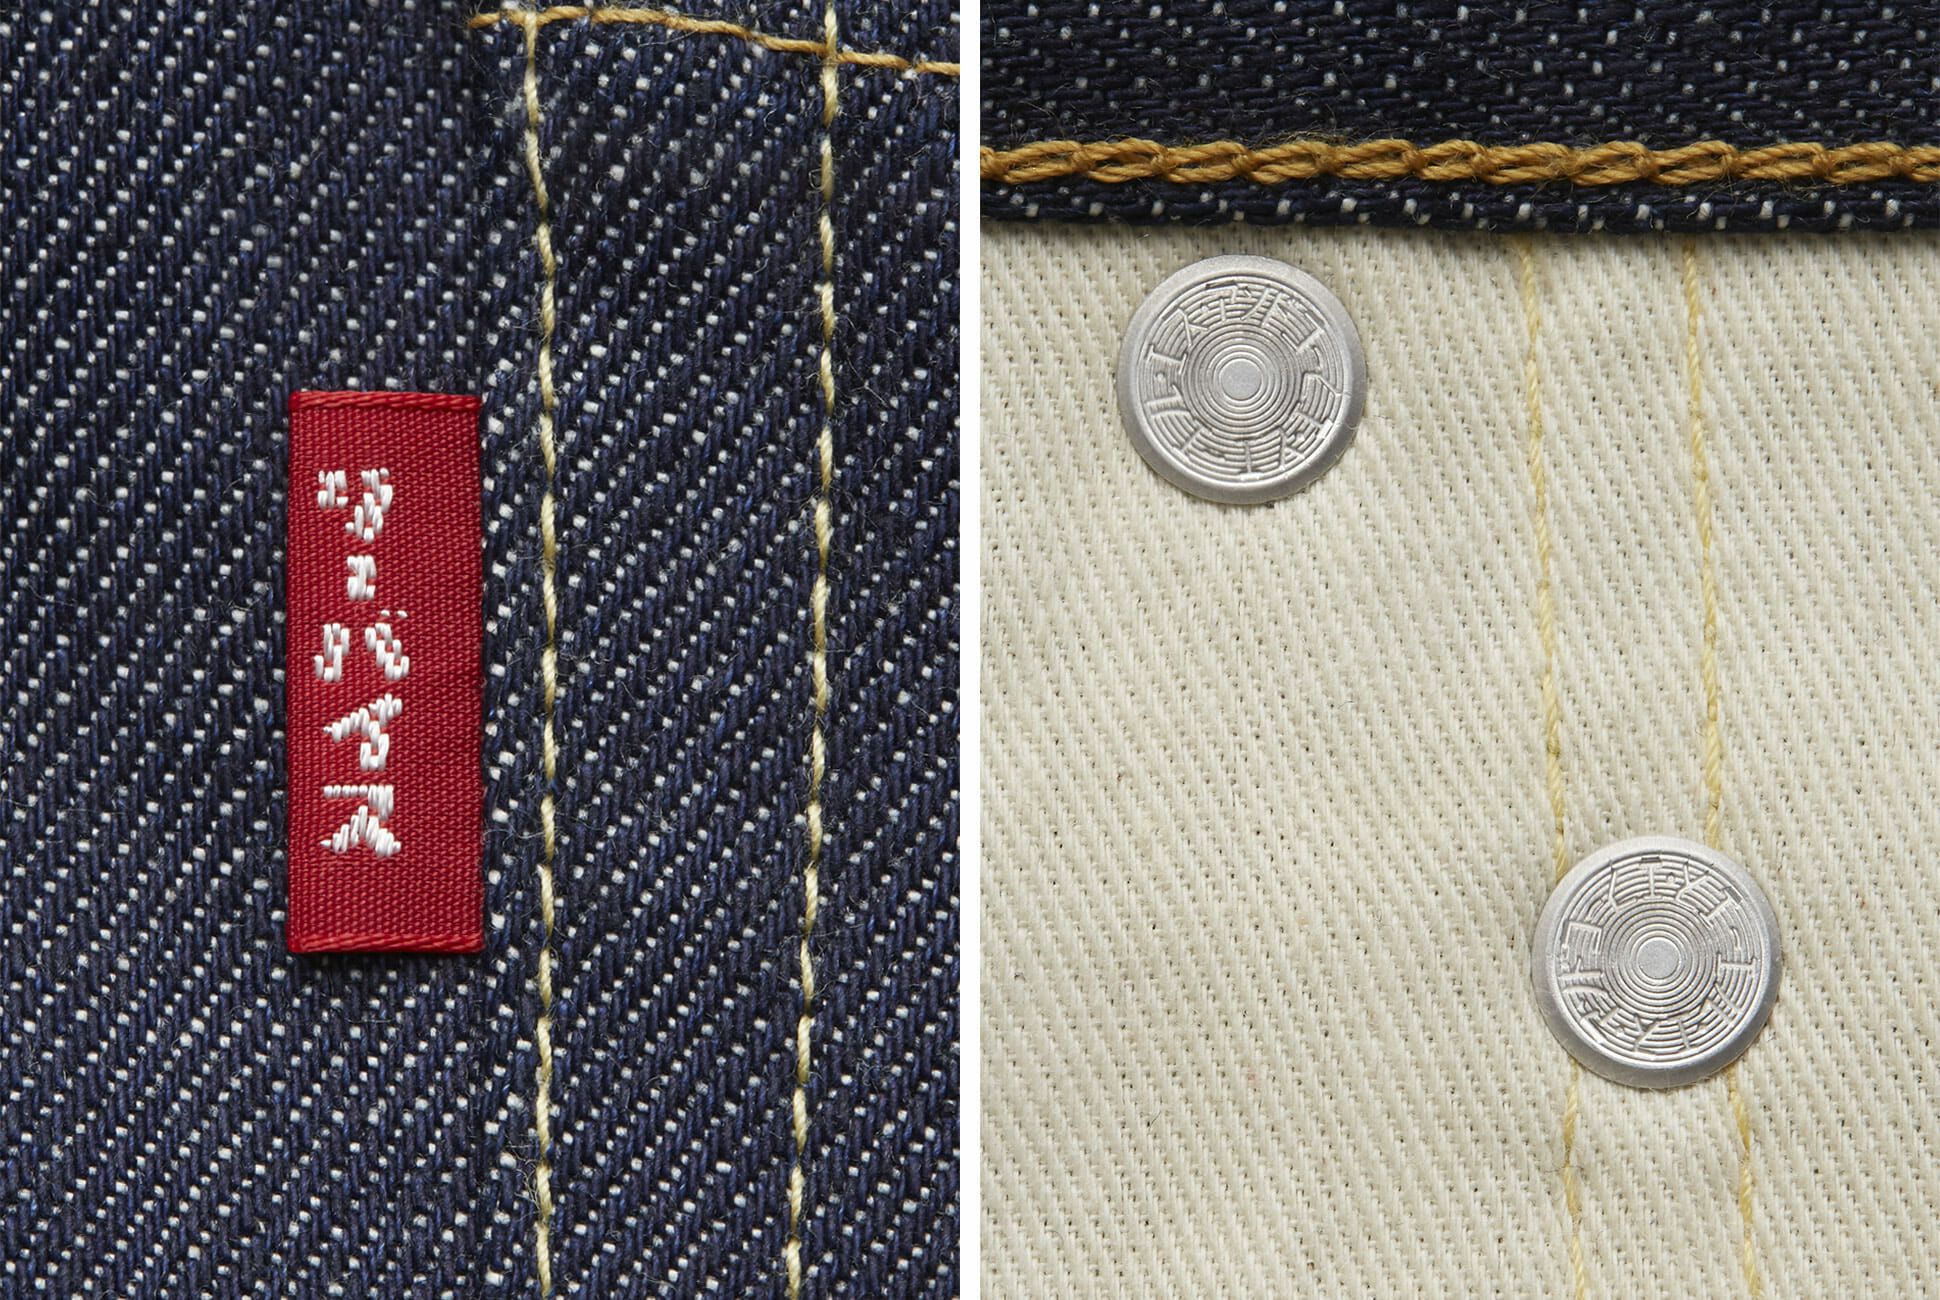 Levi's Just Launched These Insane Japanese Jeans